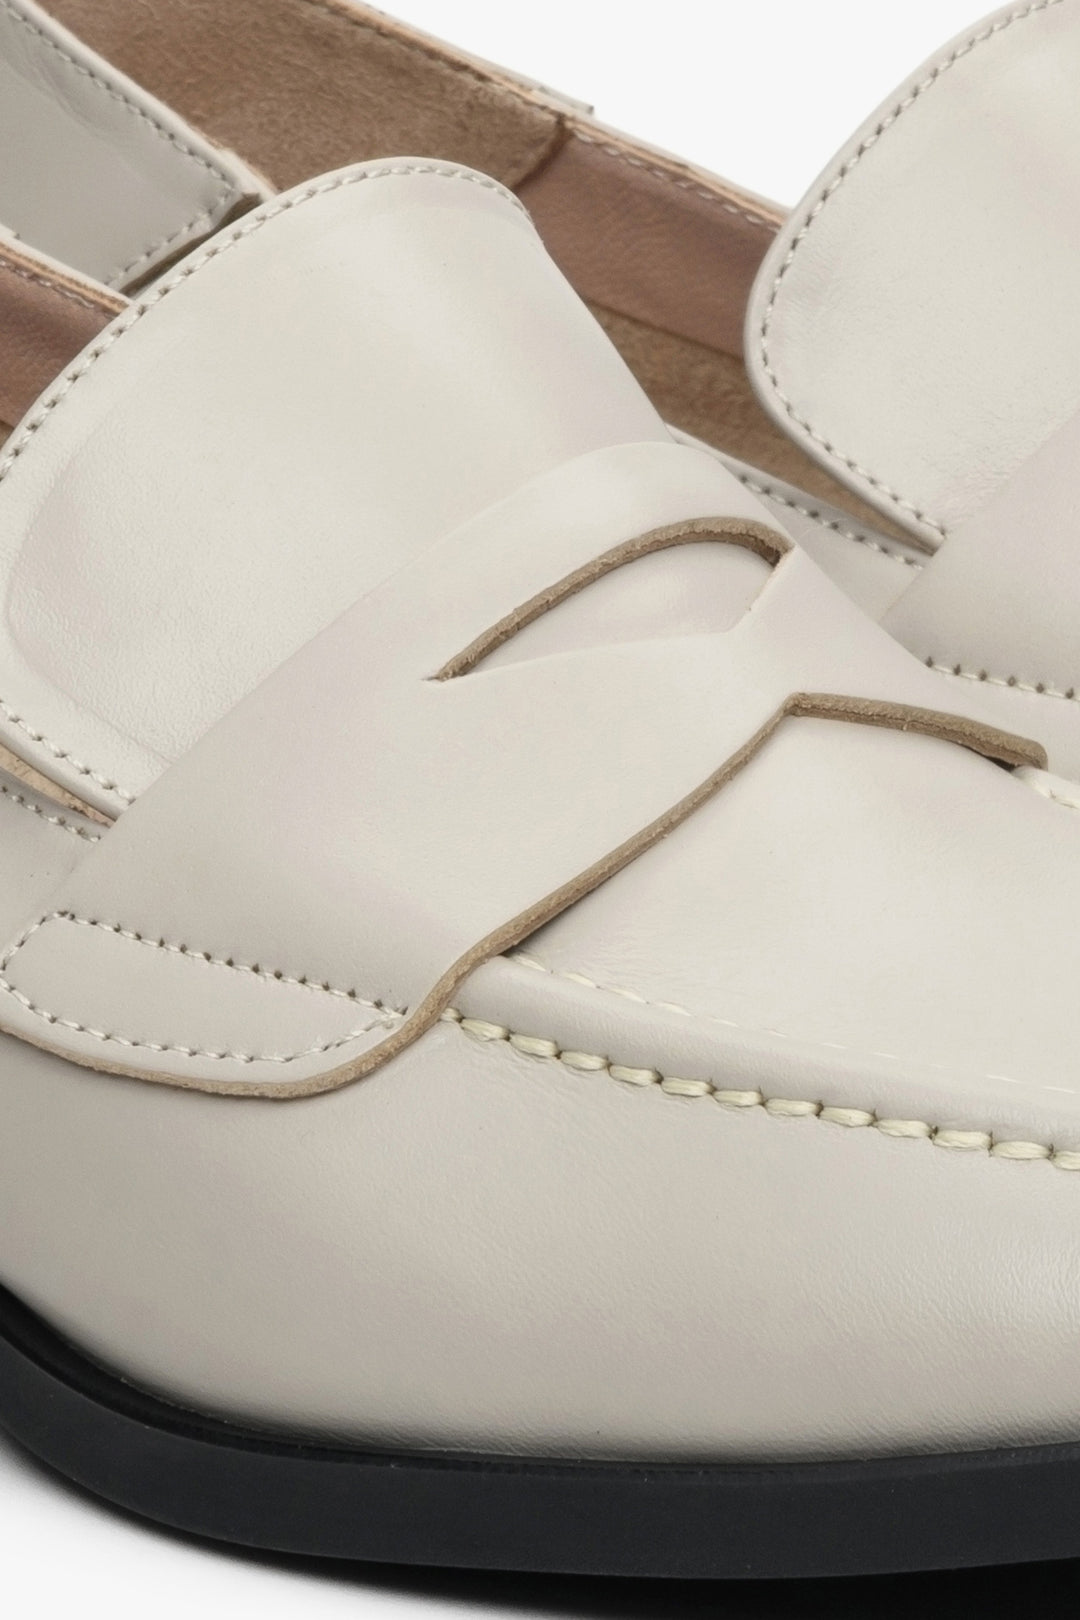 Women's beige leather loafers by Estro - close-up on the stitching pattern.